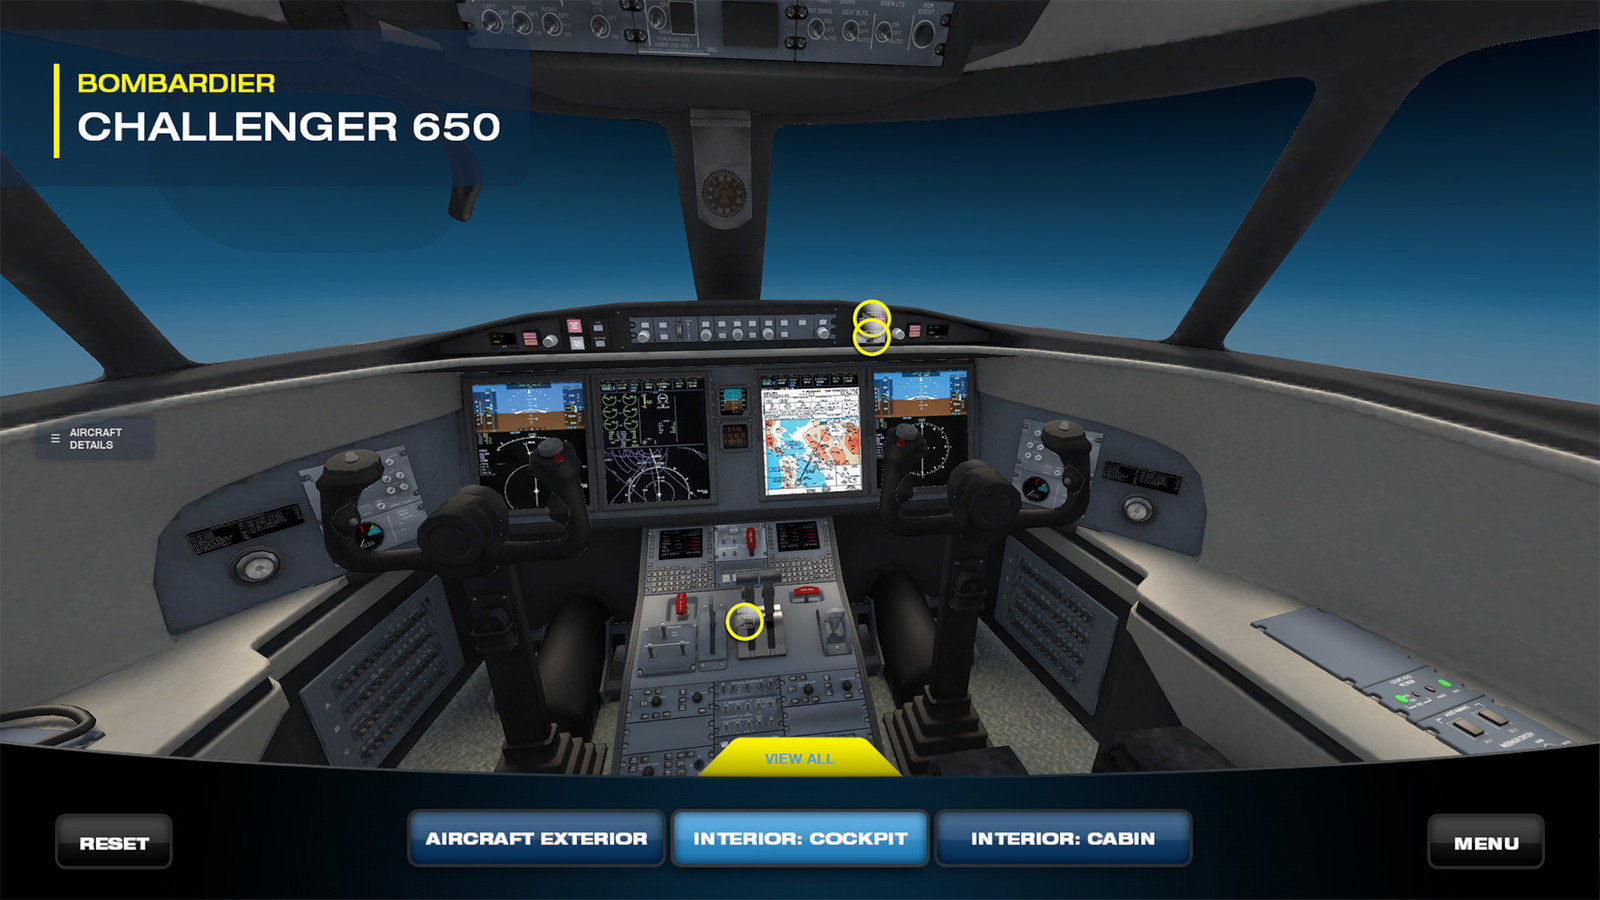 Cockpit view, had to make sure that buttons are readable and then highlight the ones that are important to airport firefighters